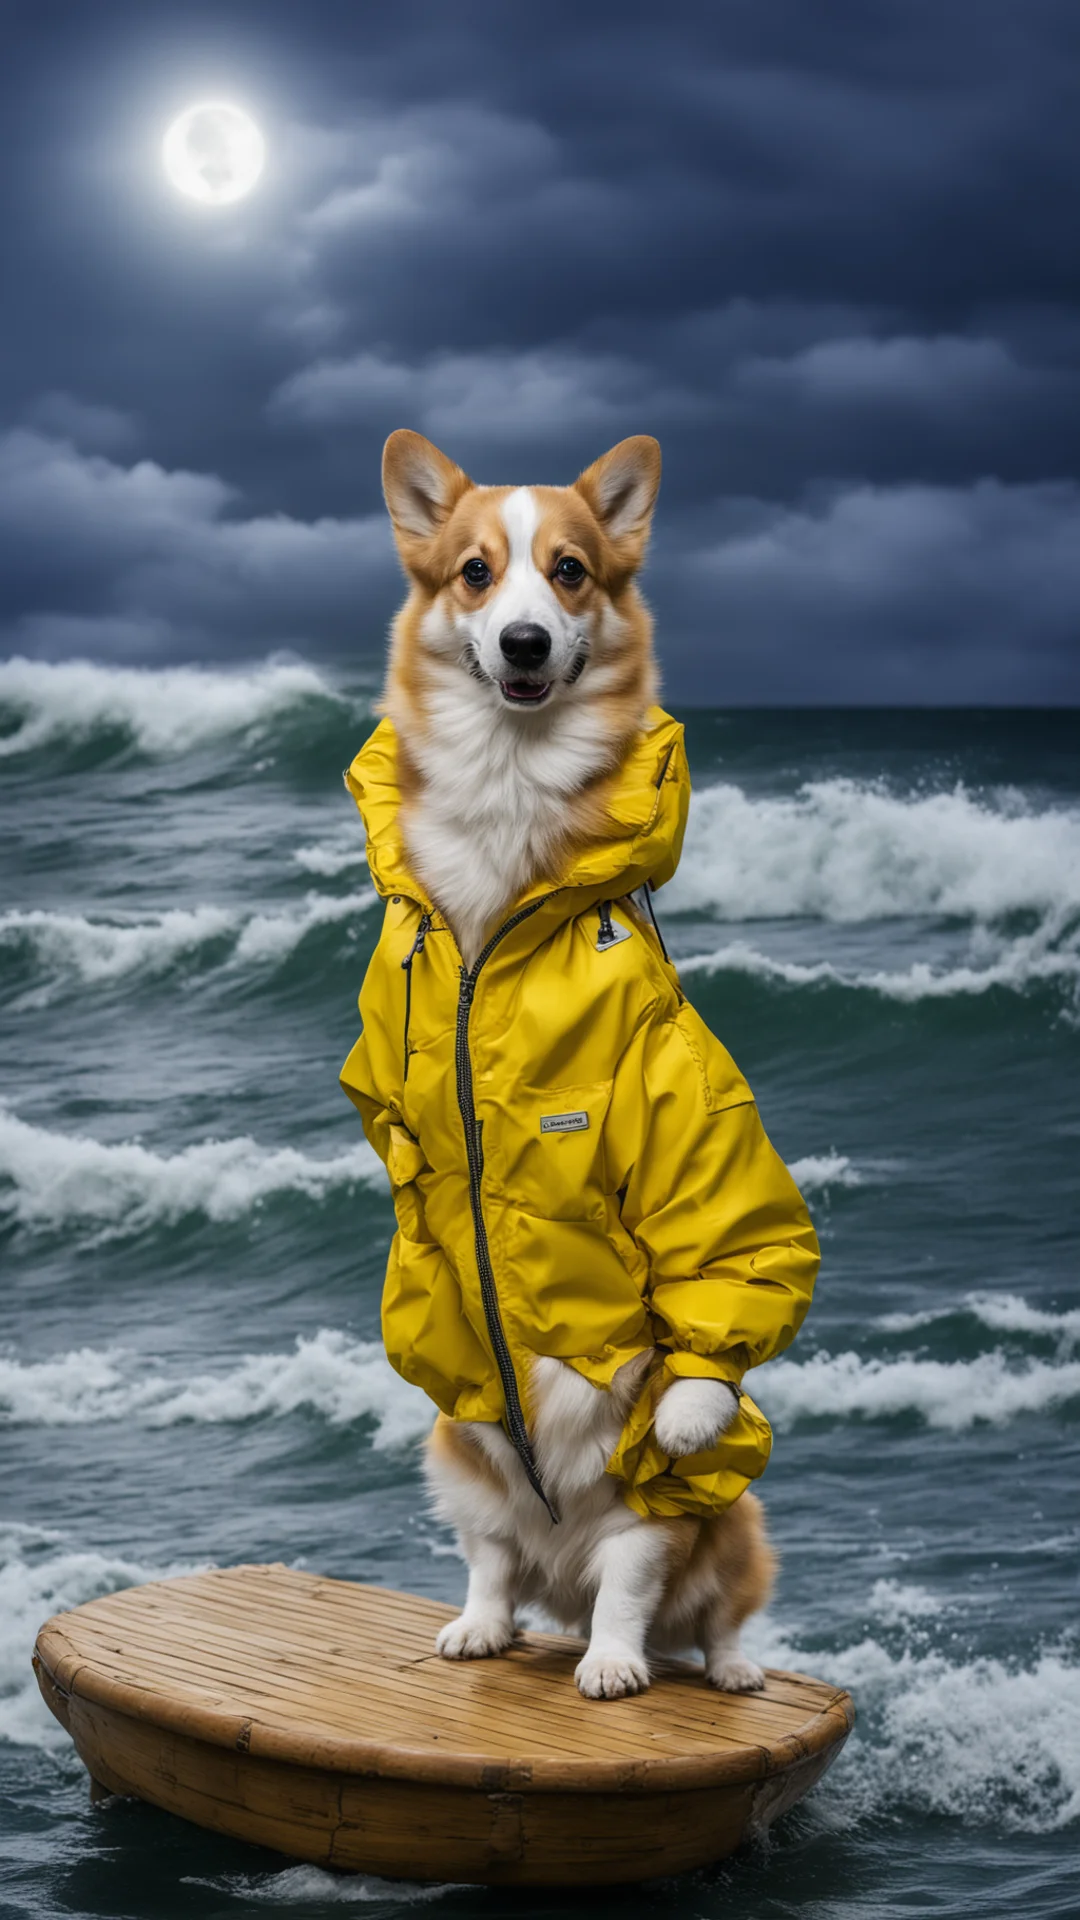 a corgi in a yellow jacket on a bamboo raft in the middle of a tormented ocean during night thunder good looking trending fantastic 1 tall